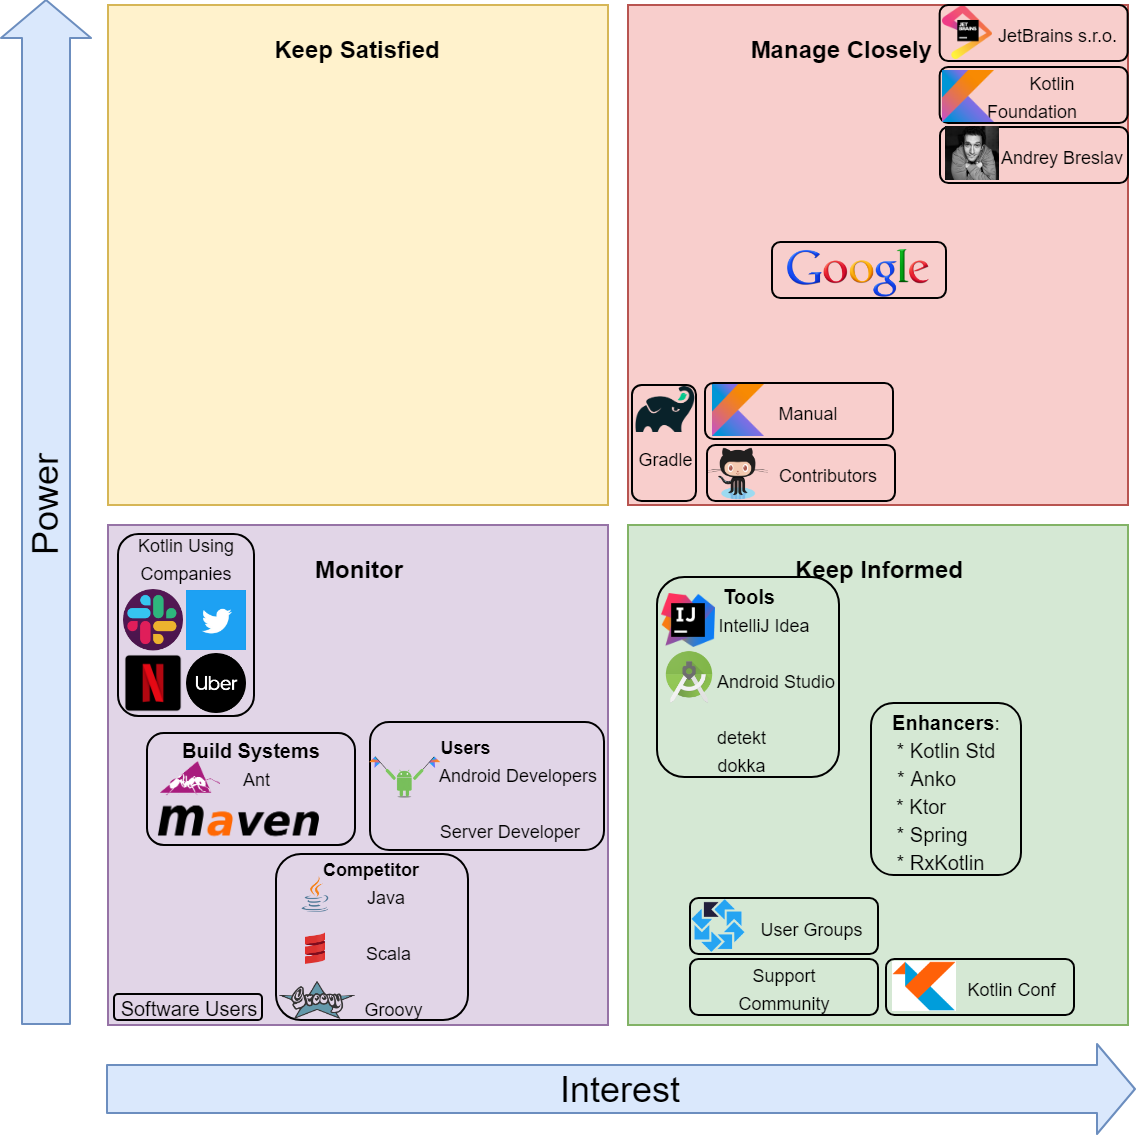 Power/Interest grid with the stakeholders of the Kotlin project.